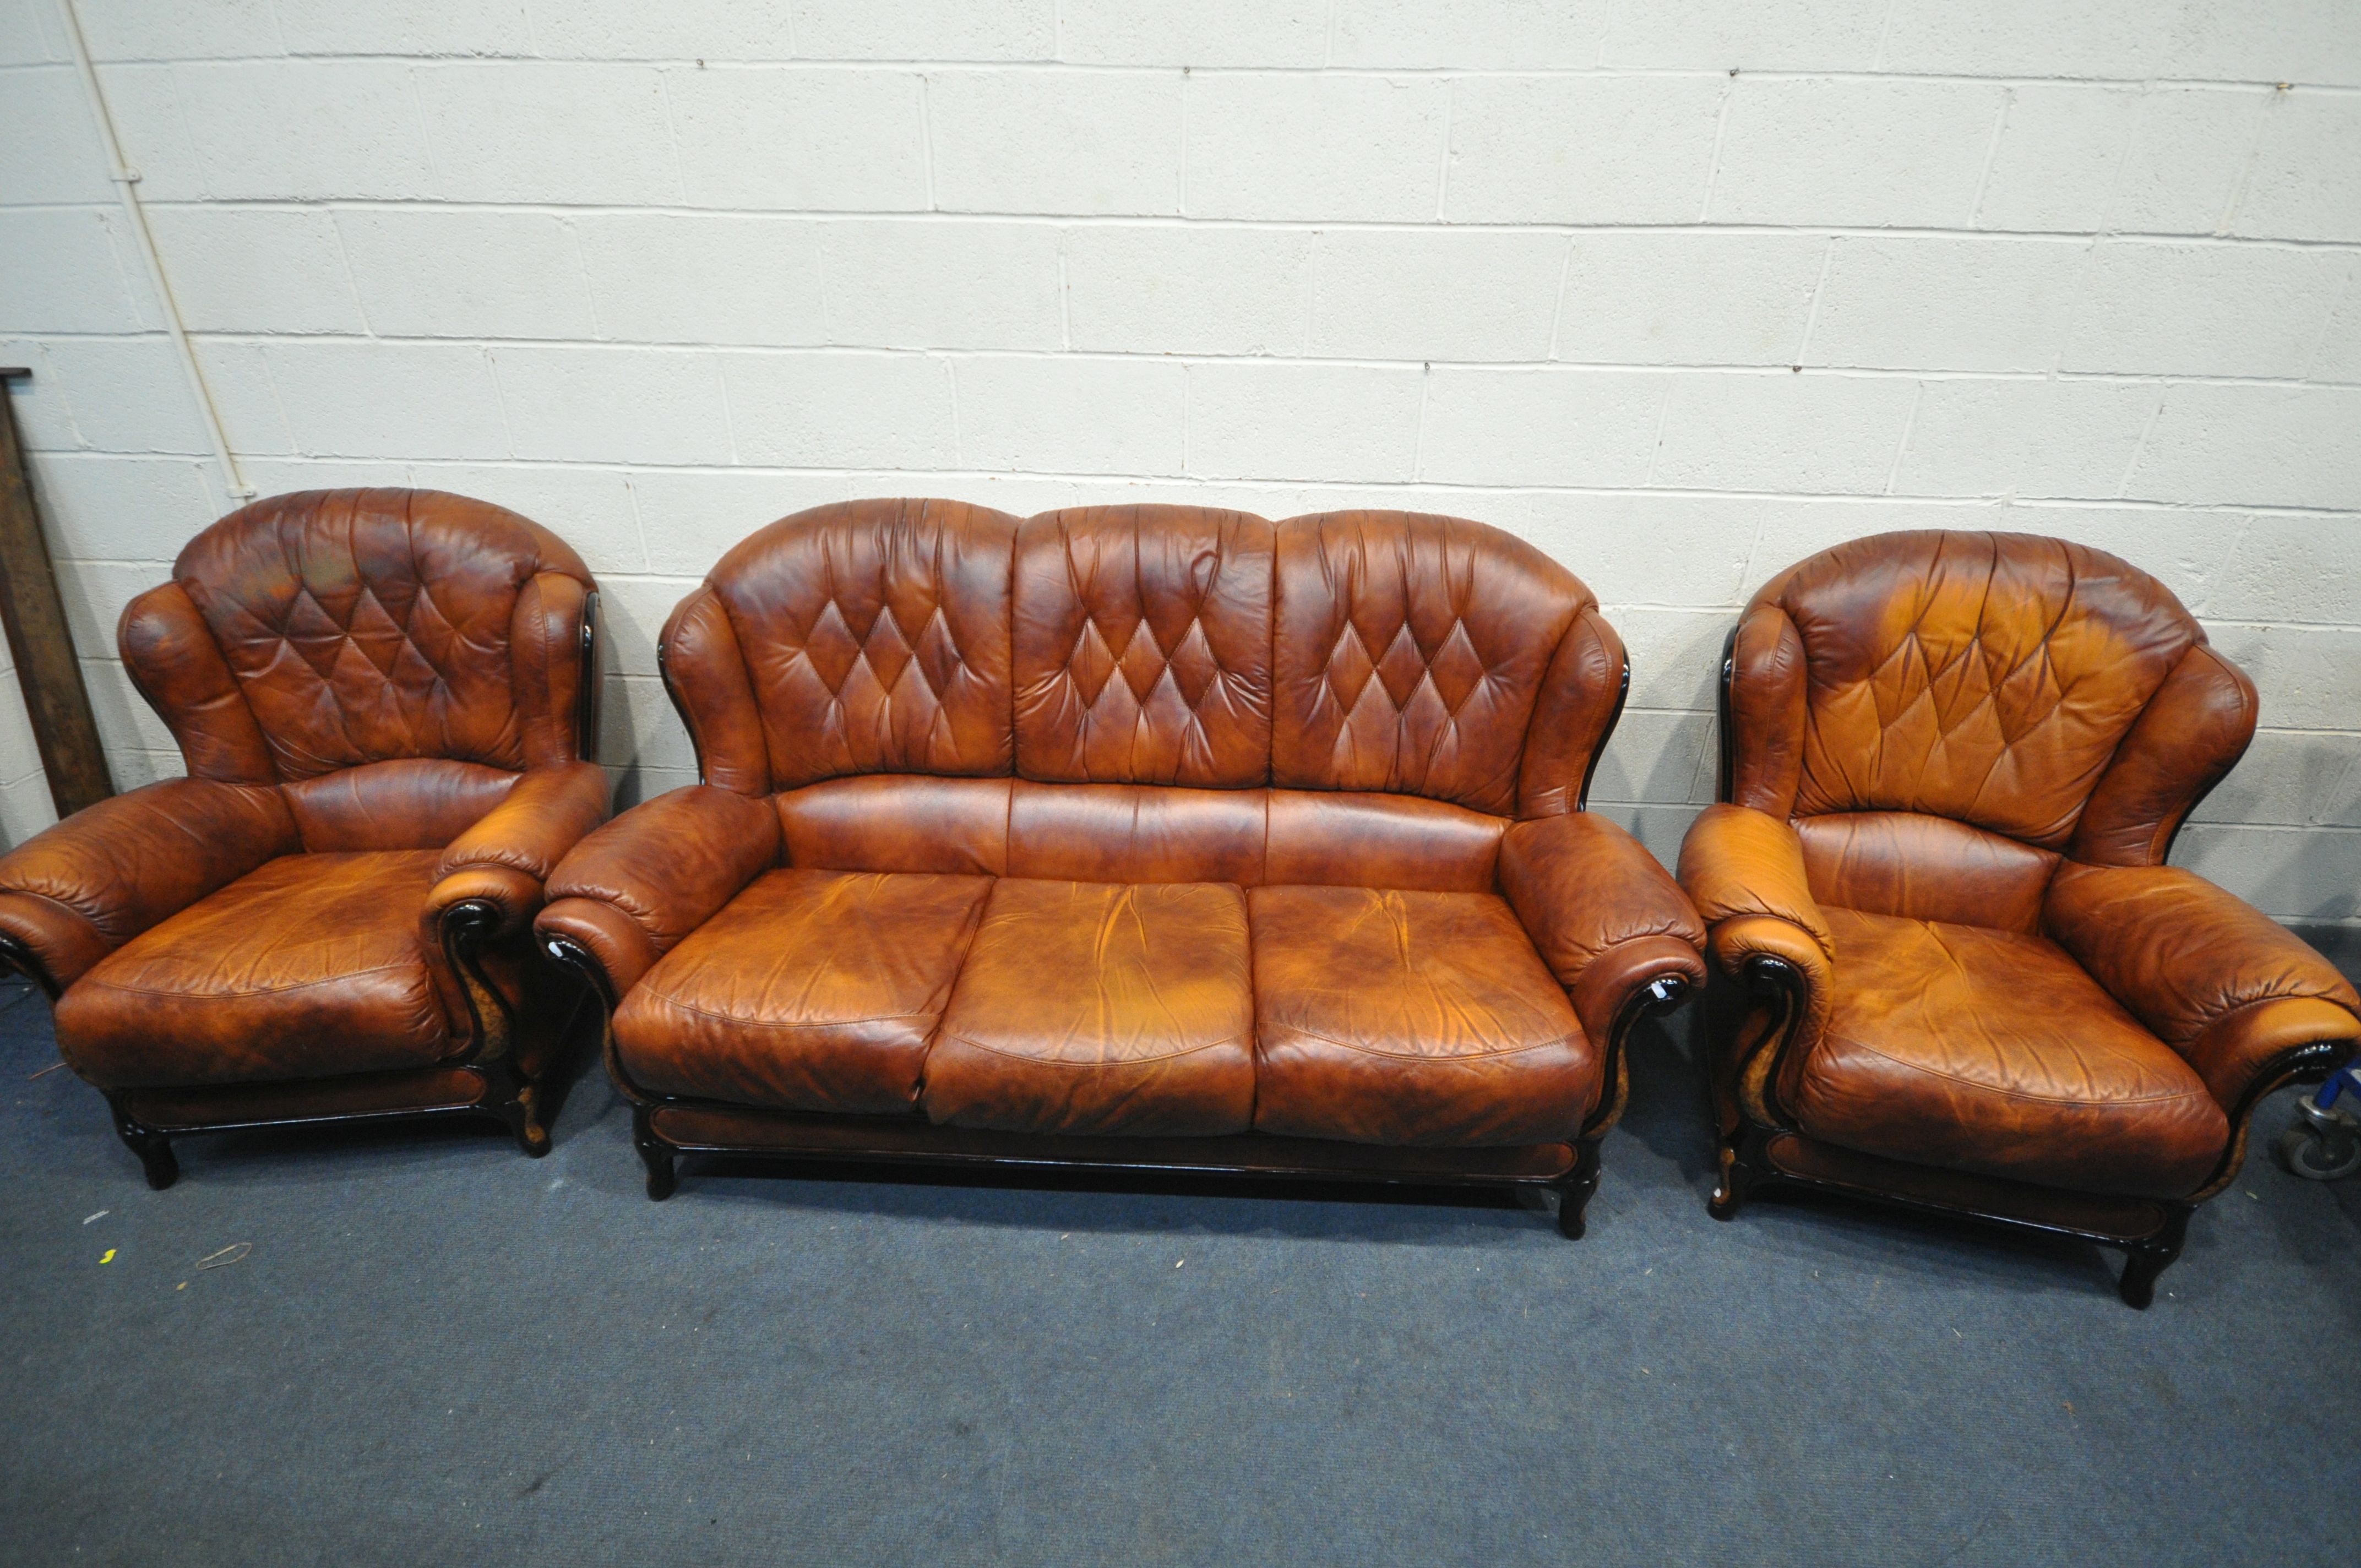 A BROWN LEATHER THREE PIECE LOUNGE SUITE, comprising a three seater sofa and a pair of armchairs (